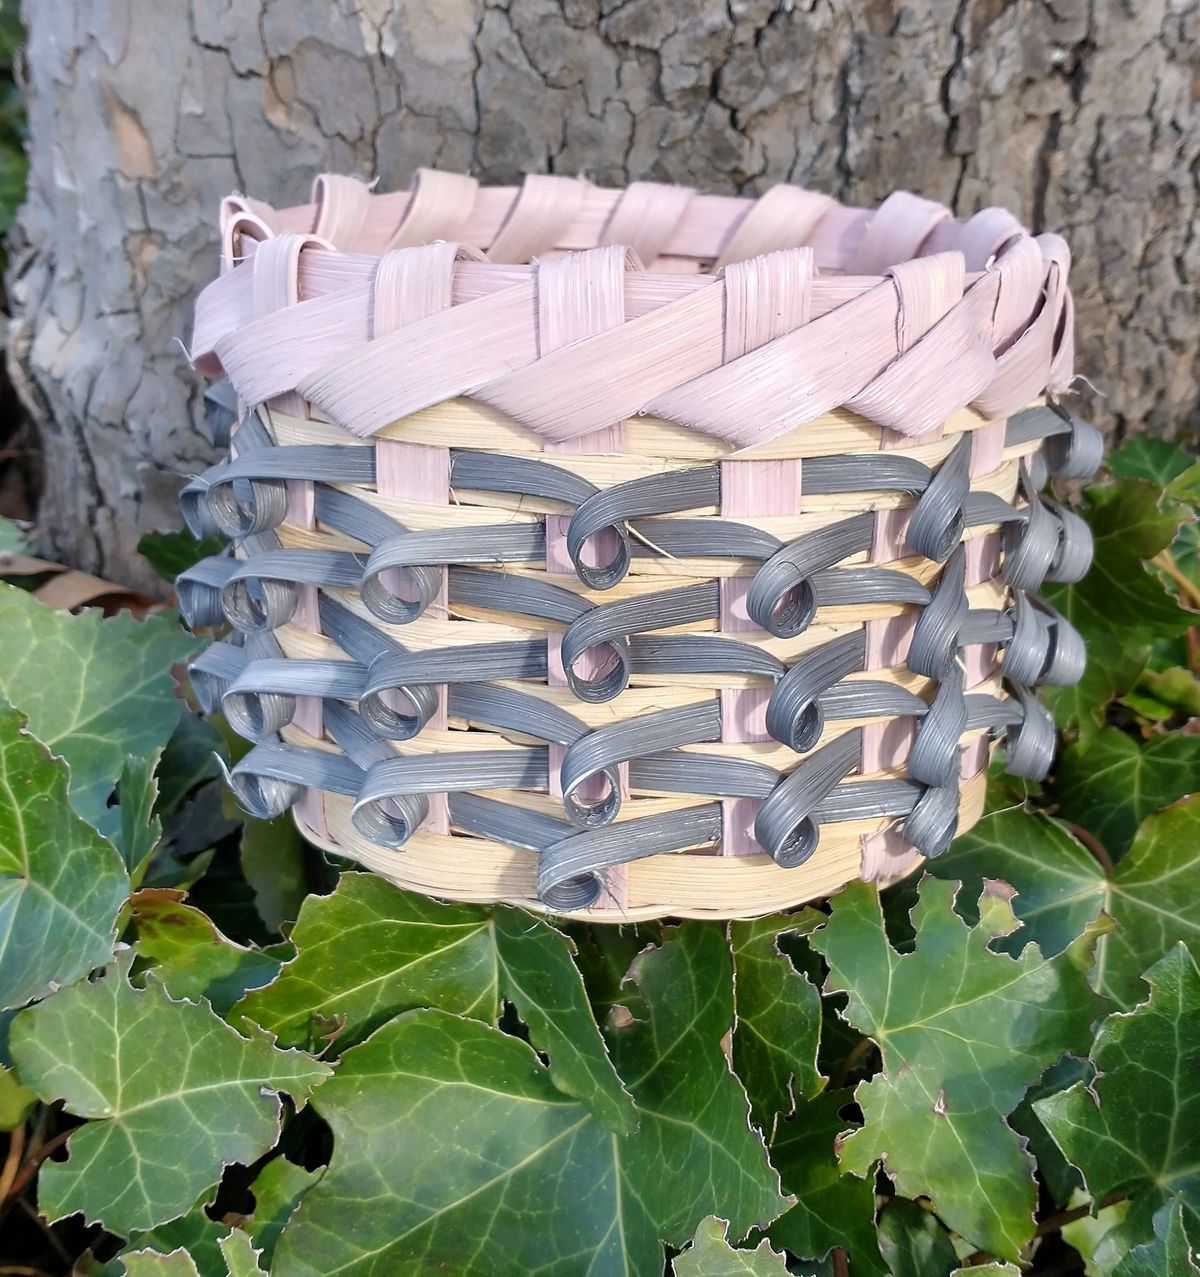 Beginning Basketry: Learn to Weave a Round Basket